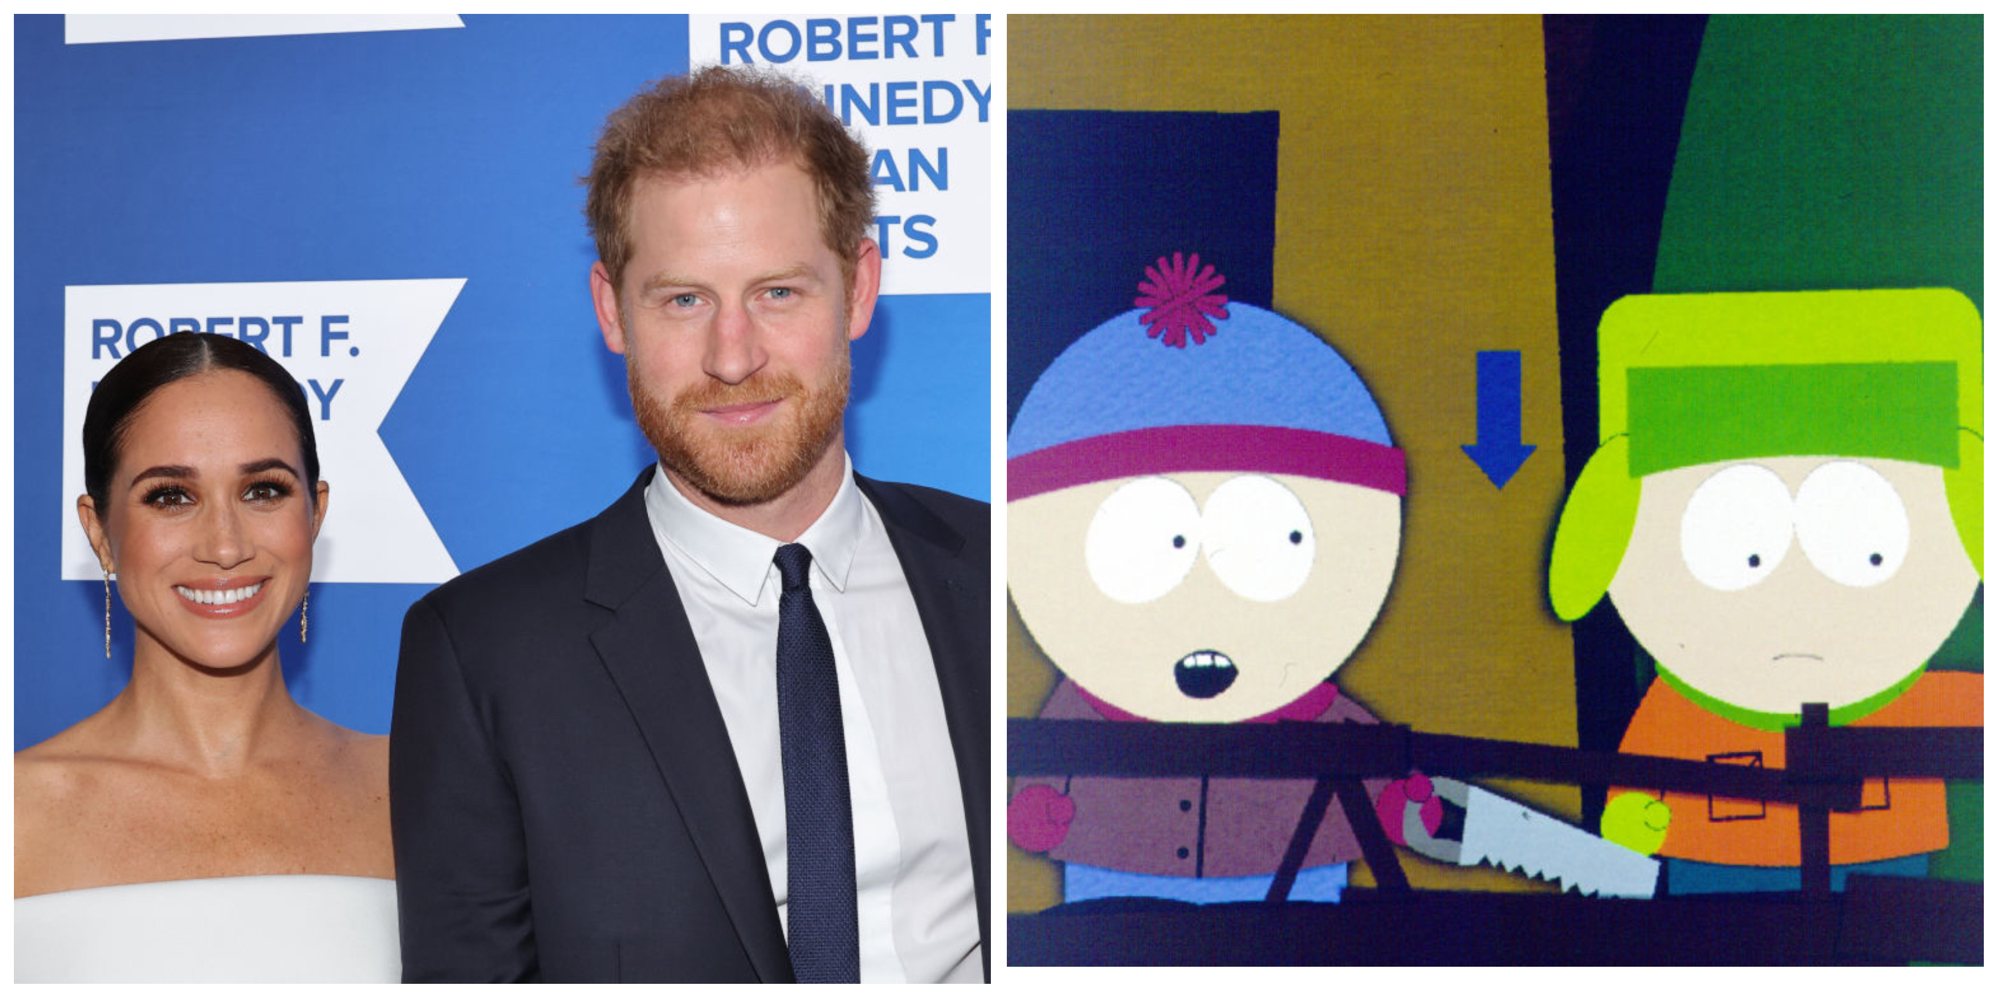 South Park season 26: Meghan and Harry jokes featured in 'brutal' Worldwide Privacy  Tour episode